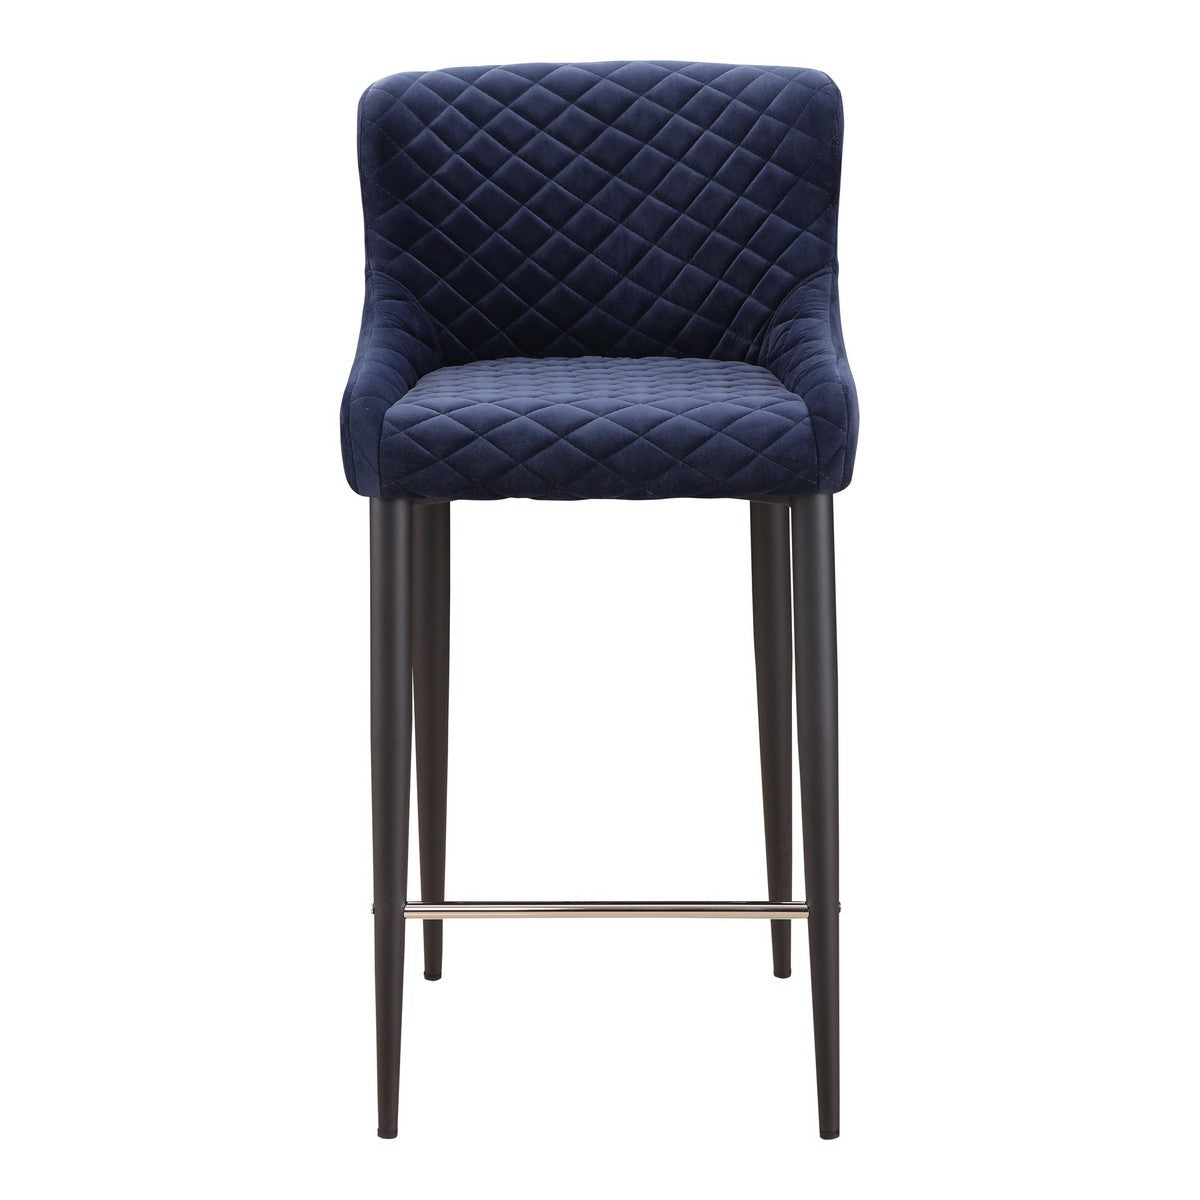 Moe's Home Collection Etta Counter Stool Dark Blue - ER-2048-46 - Moe's Home Collection - Counter Stools - Minimal And Modern - 1